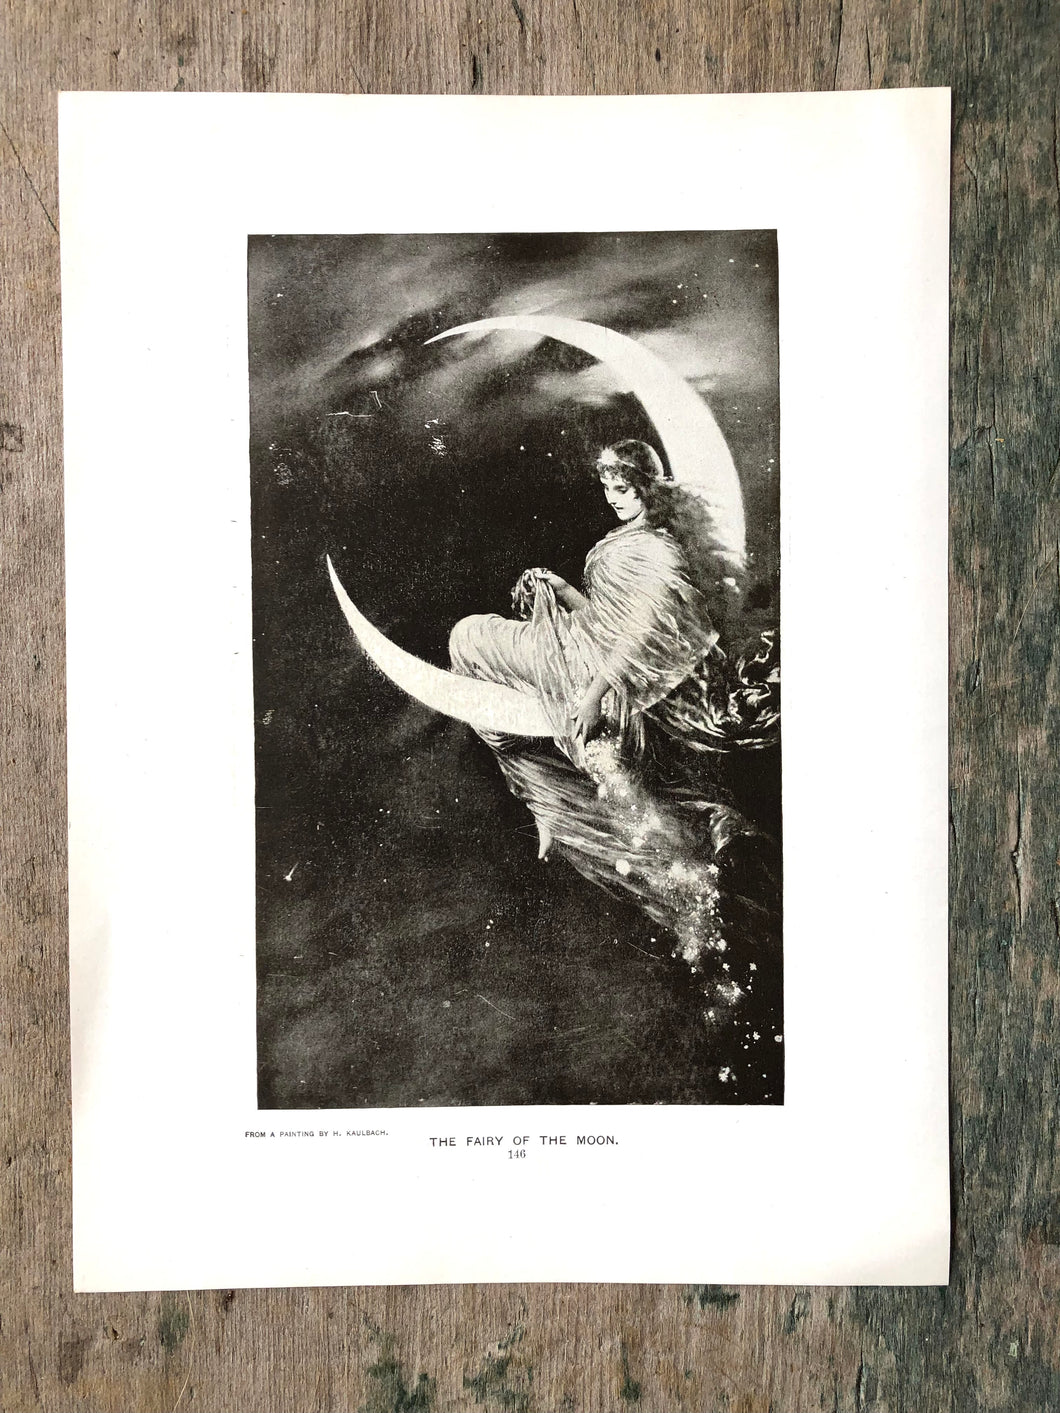 The Fairy of the Moon reproduced from a painting by H. Kaulbach